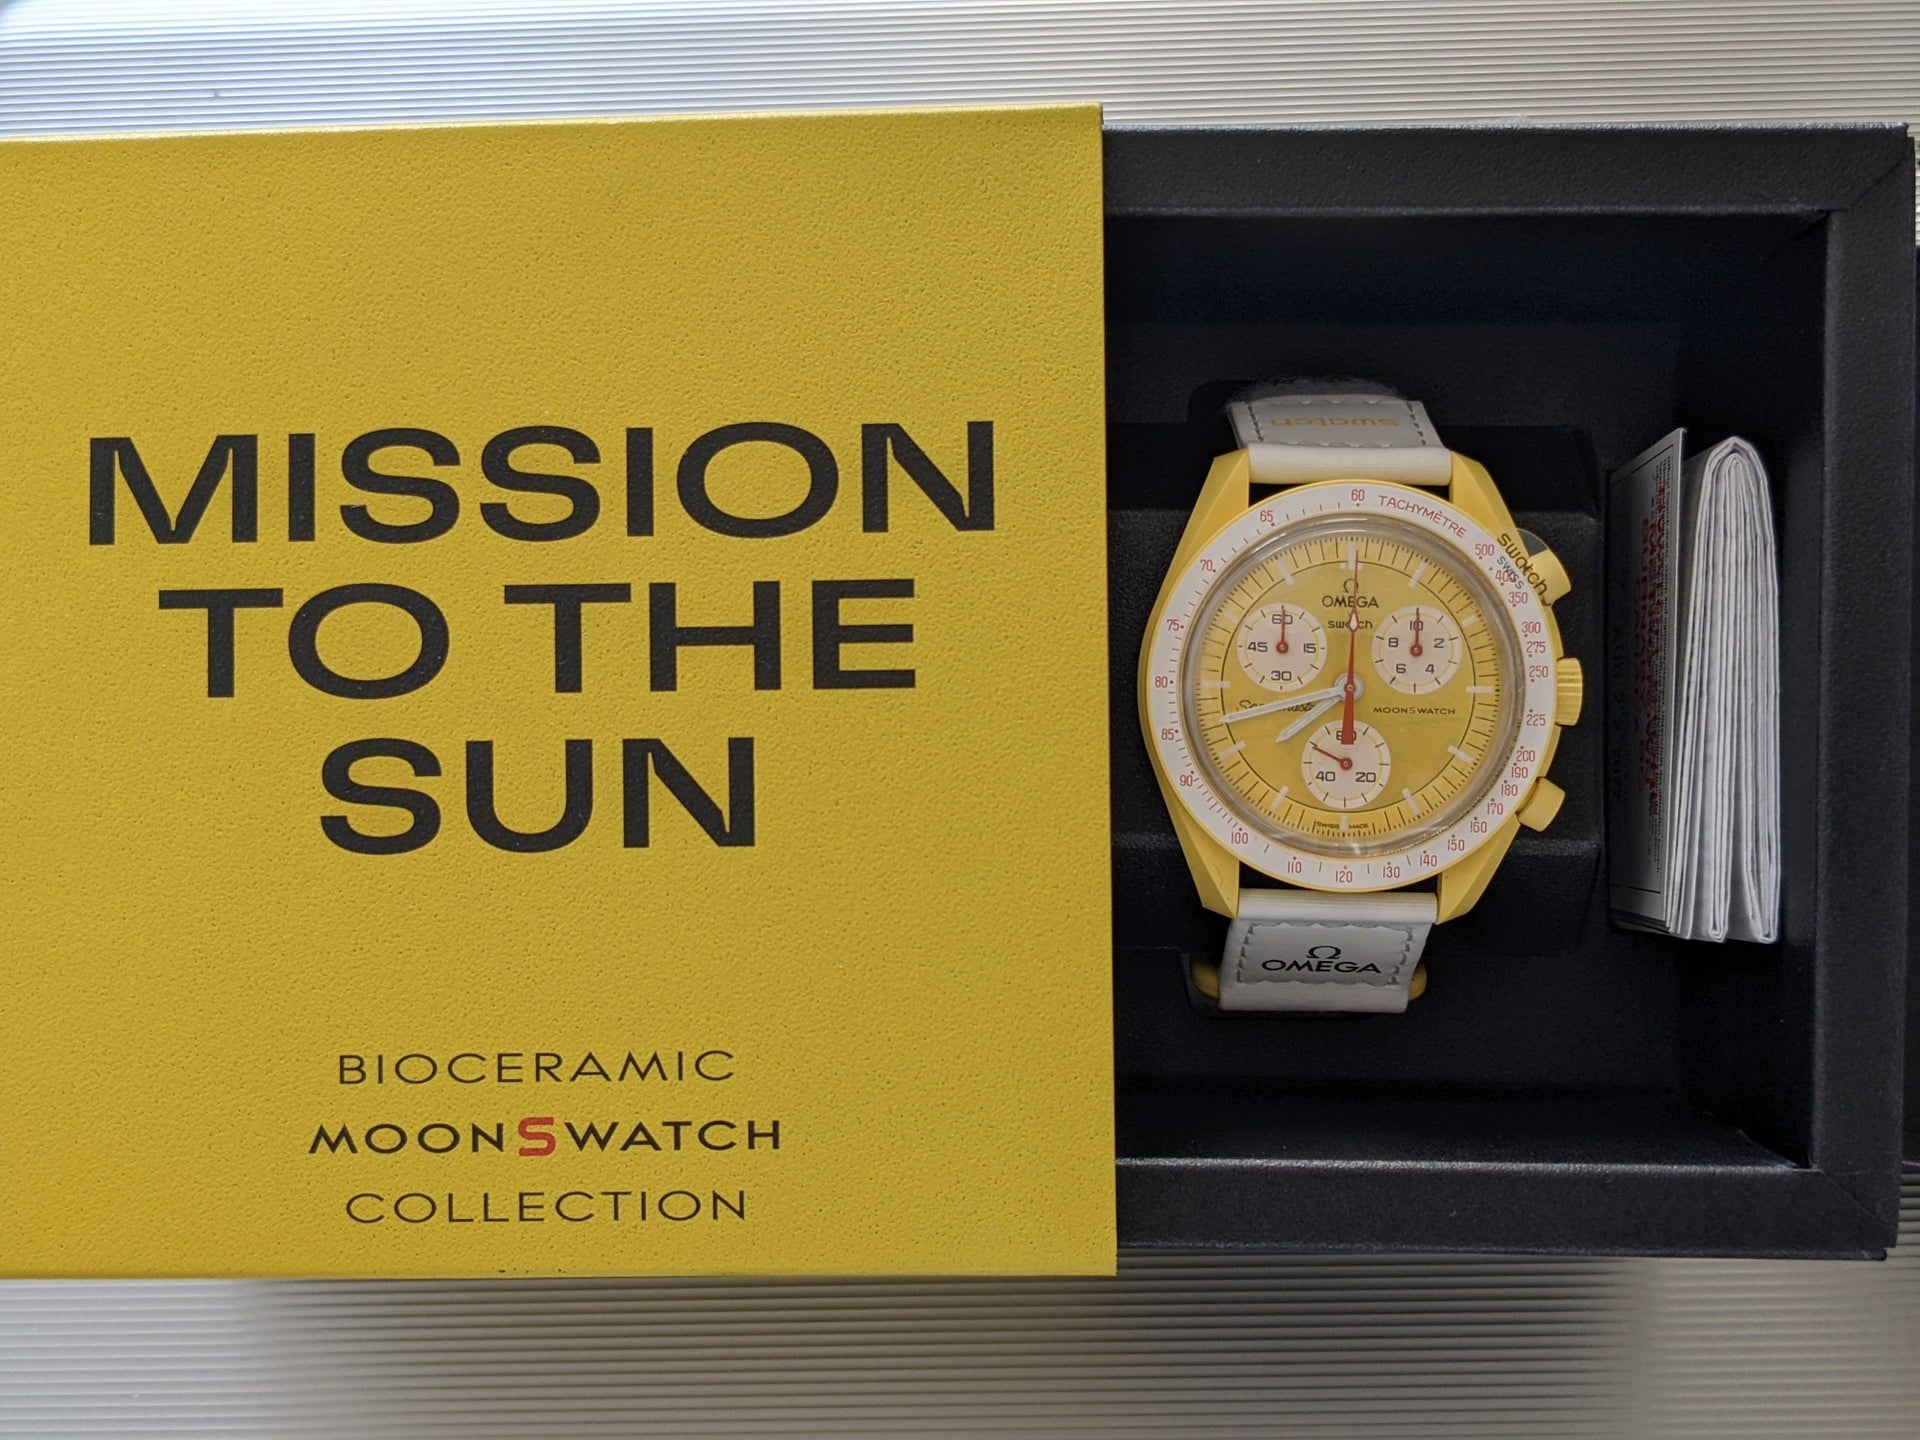 New Swatch x Omega Moonswatch Mission to the Sun | WatchUSeek